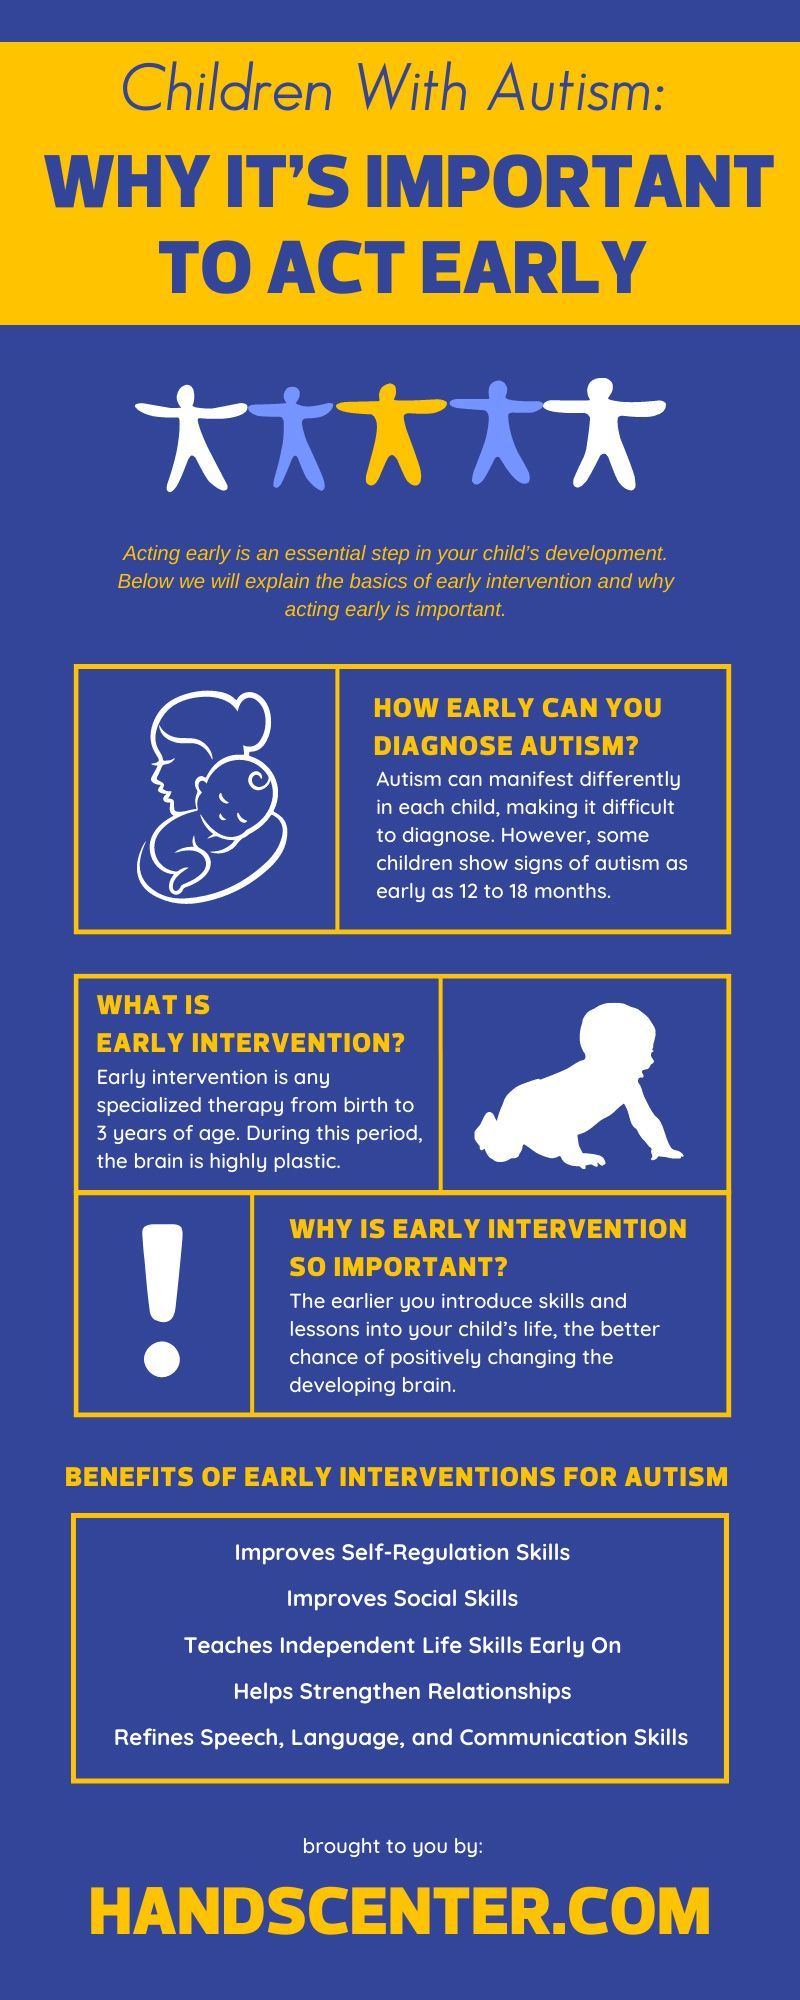 Children With Autism: Why It’s Important To Act Early